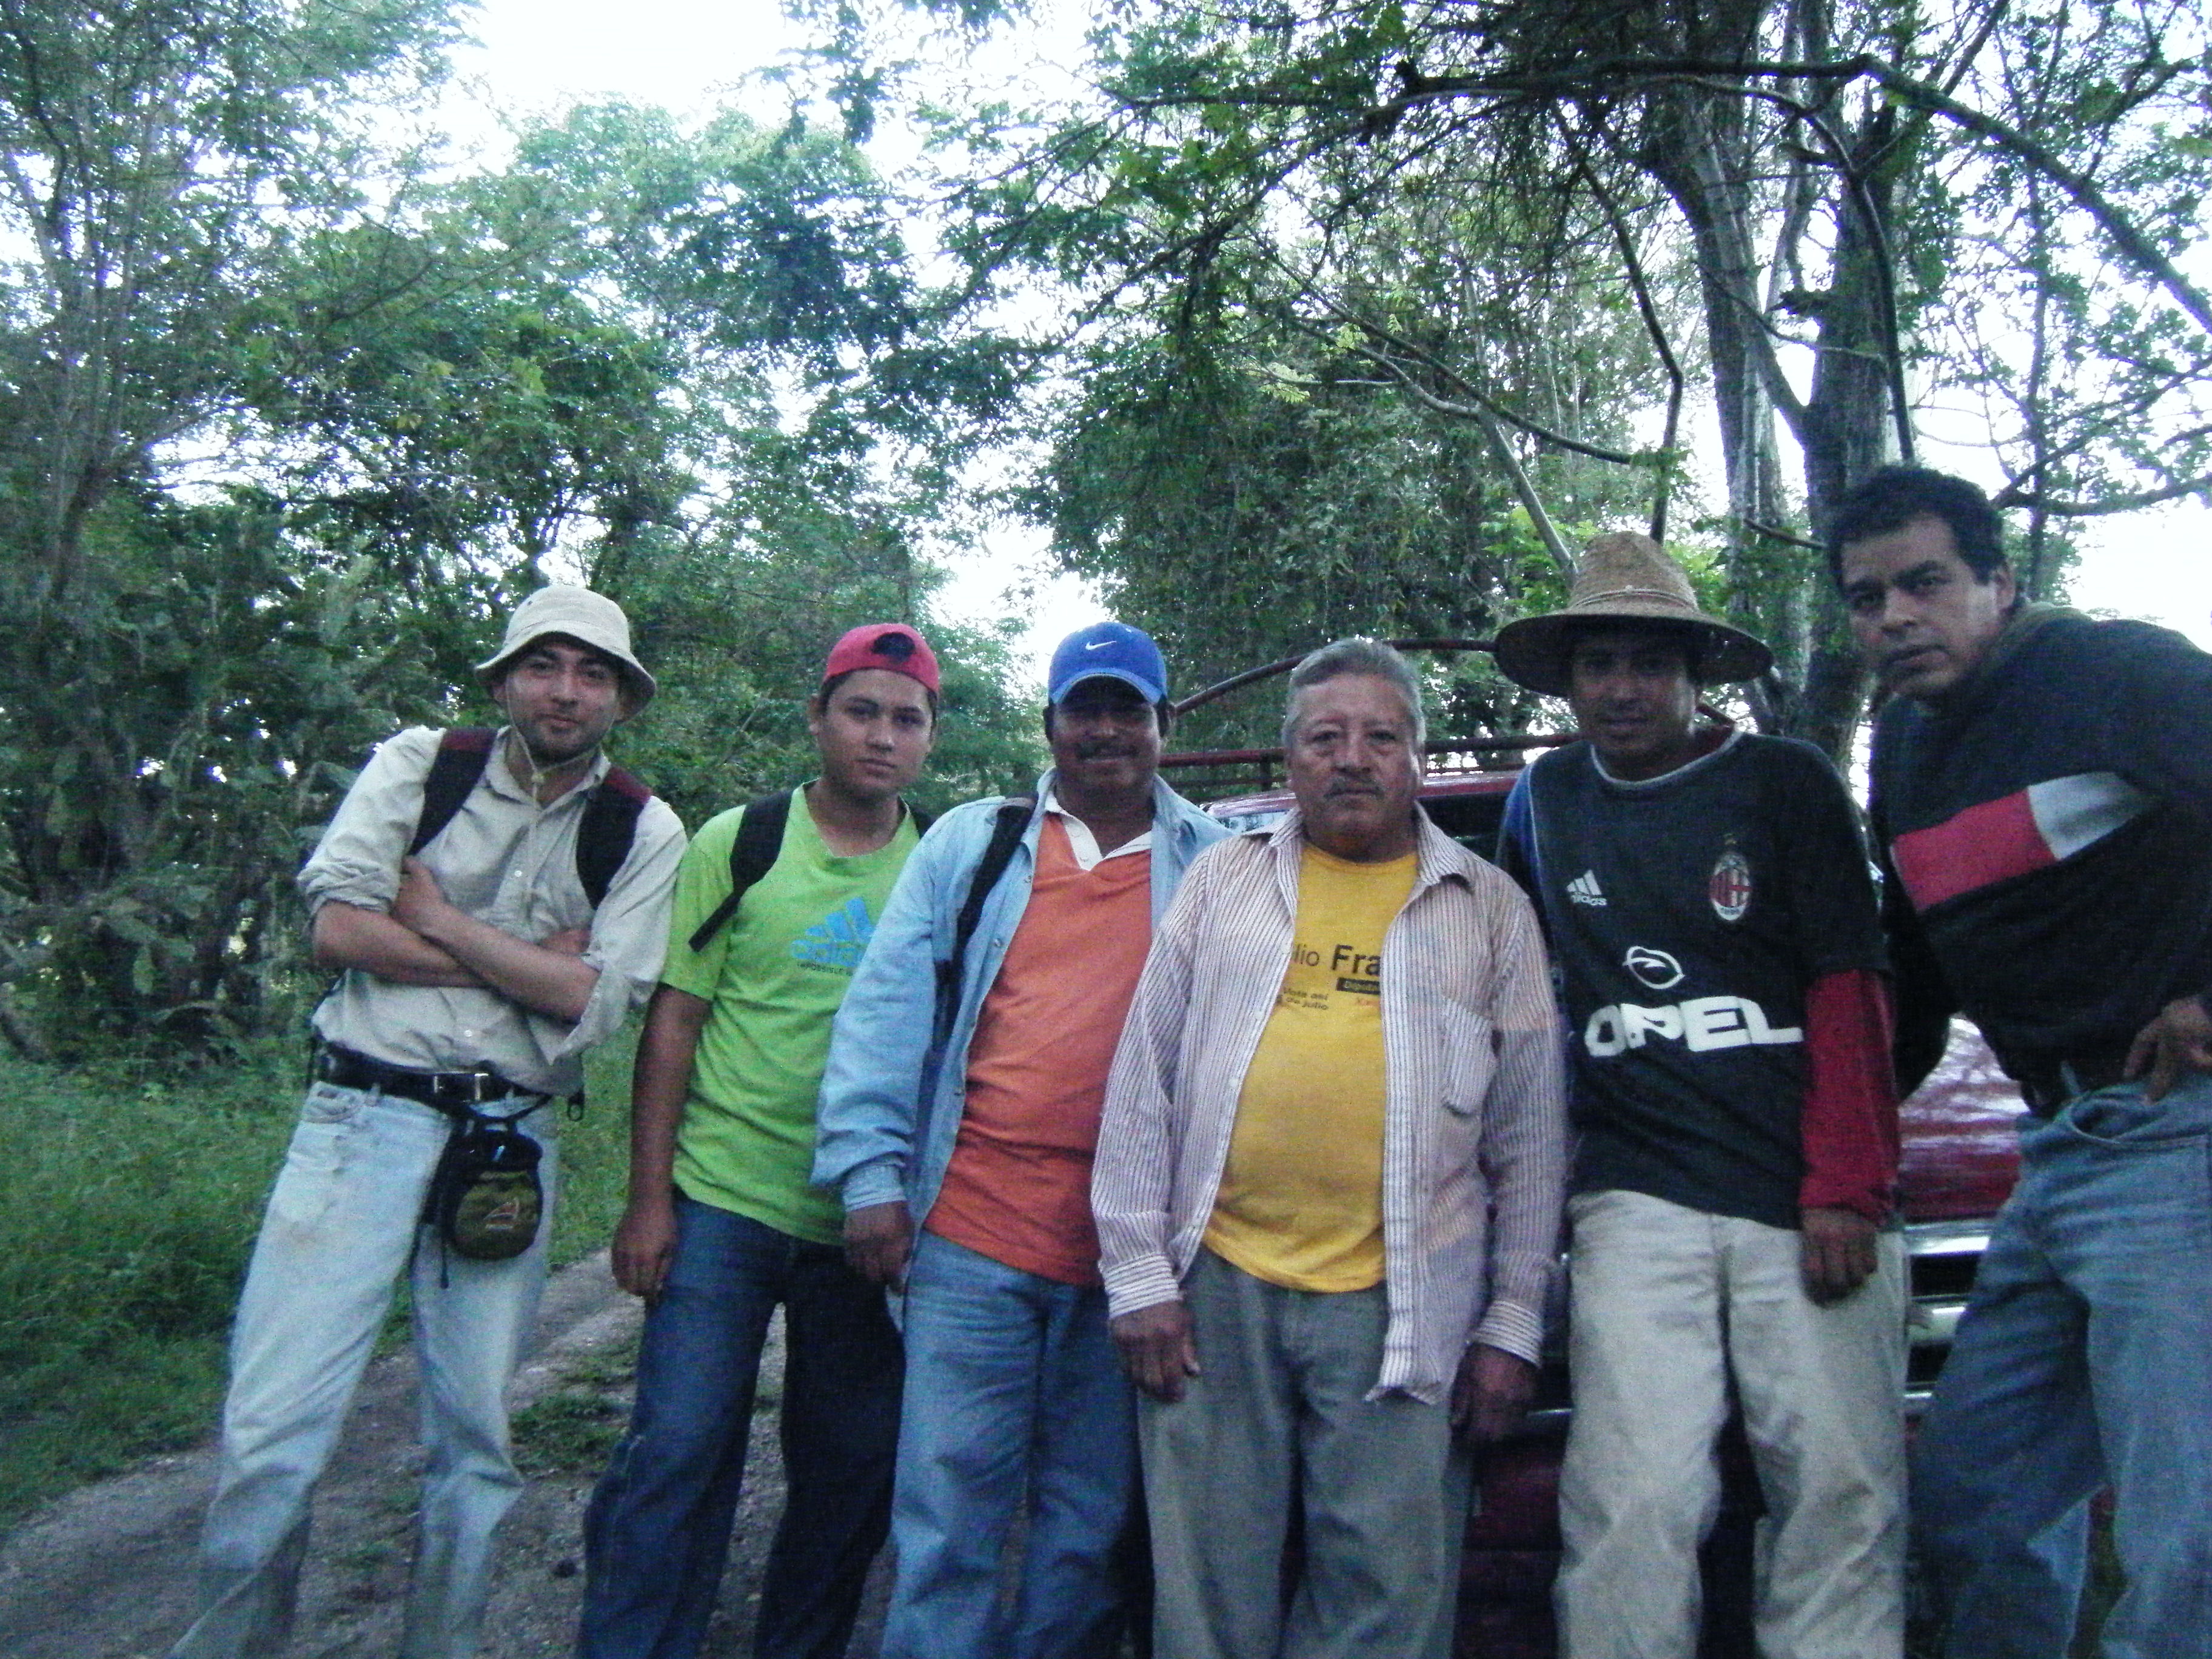 From left to right: Rodrigo Ángeles Flores (field archaeologist), Luis (local high-school student, collaborating as part of his community service), Don Justino, Don Abraham, Fredie and Rodolfo Parra Ramírez